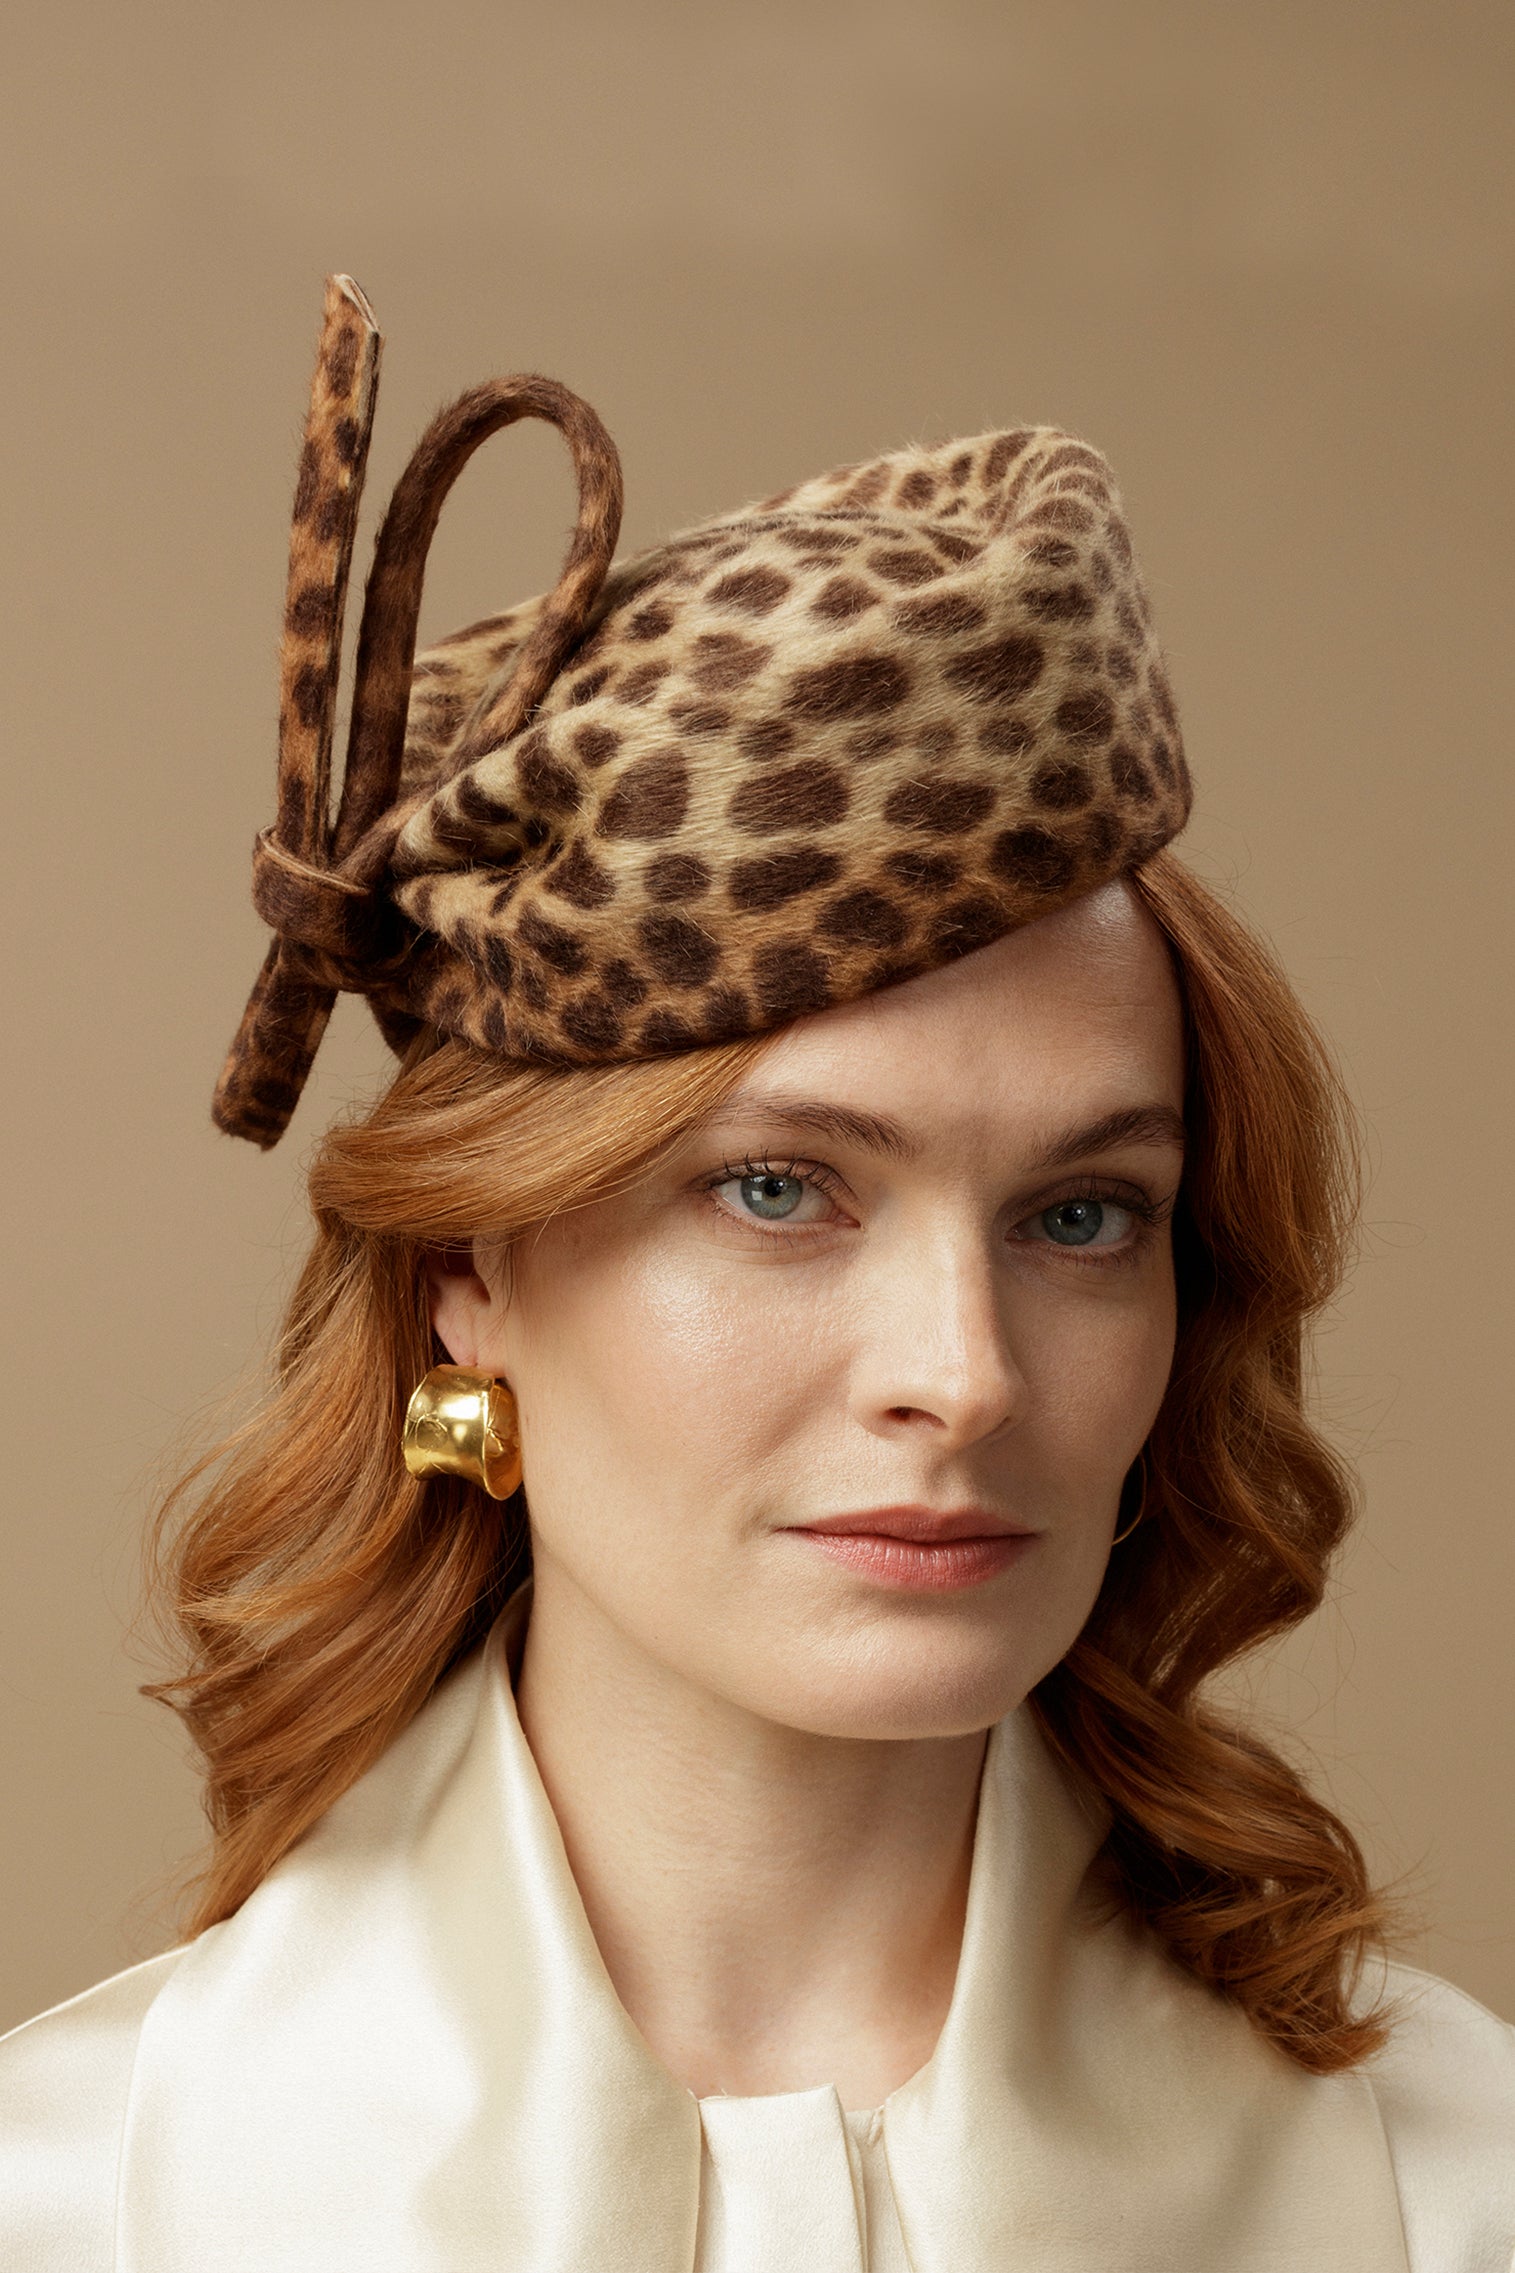 Leopard Mayfair Pillbox Hat - Lock Couture by Awon Golding - Lock & Co. Hatters London UK